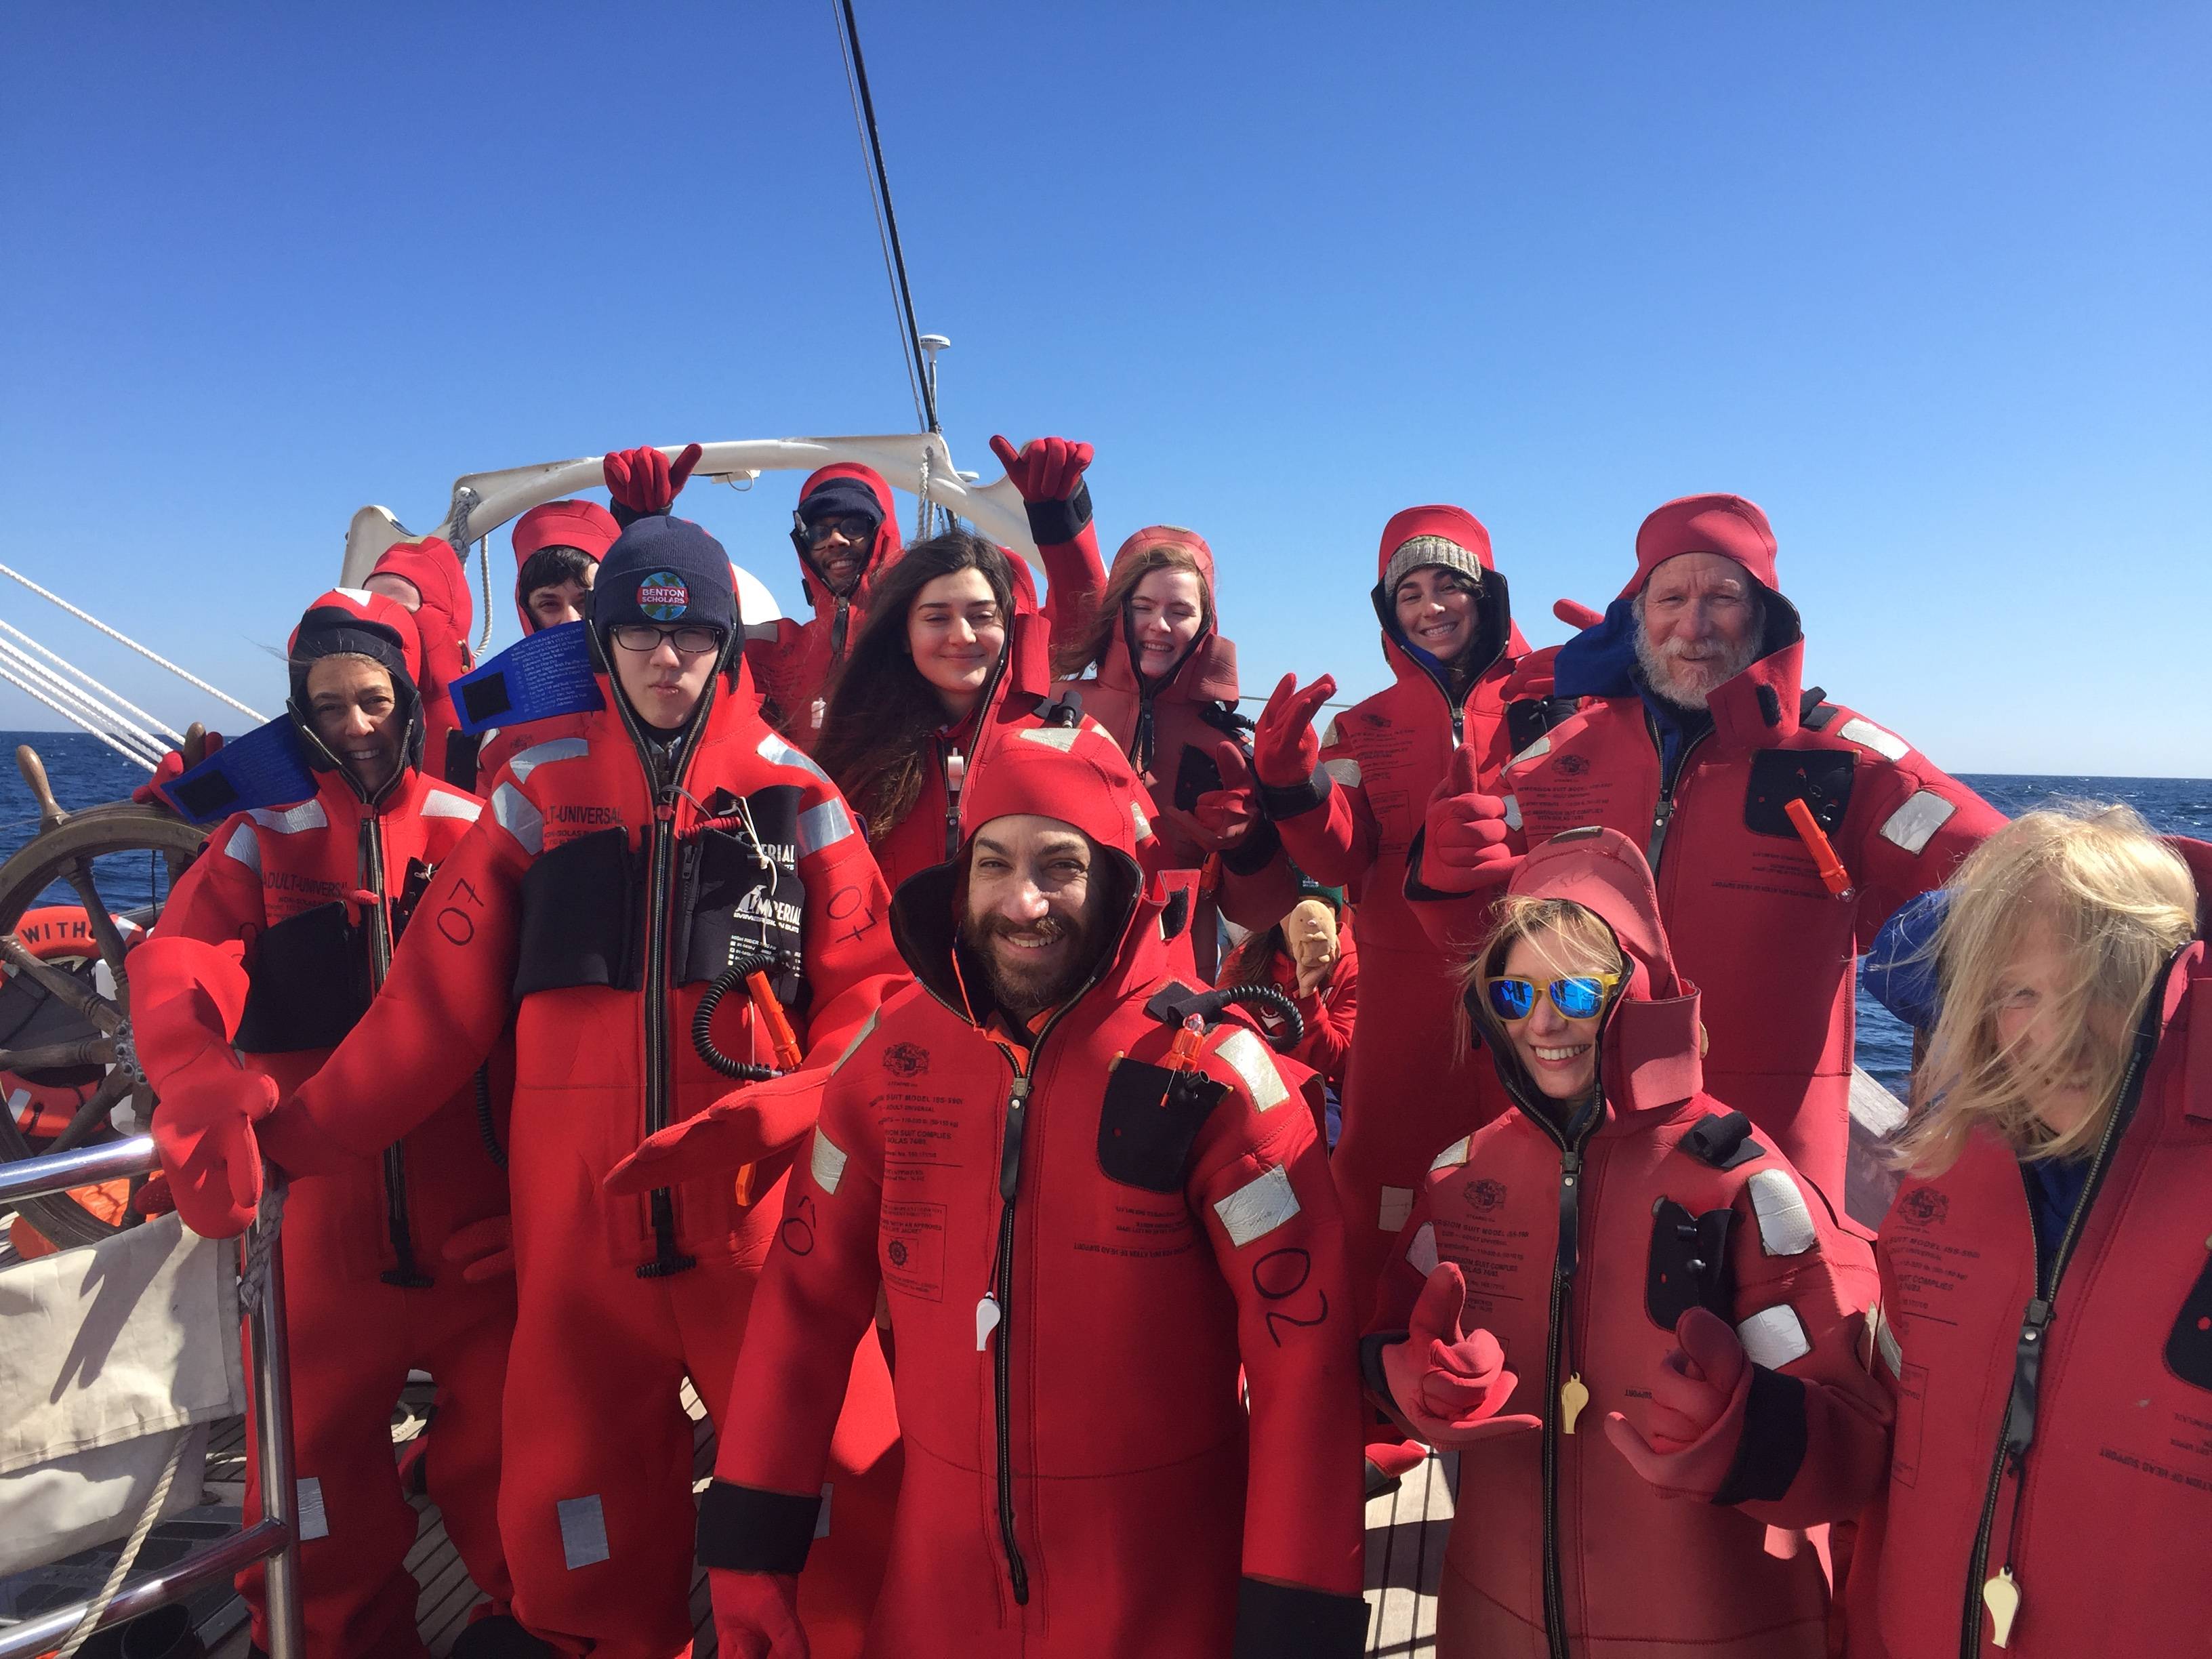 Benton scholars in red "gumby" suits aboard a research voyage